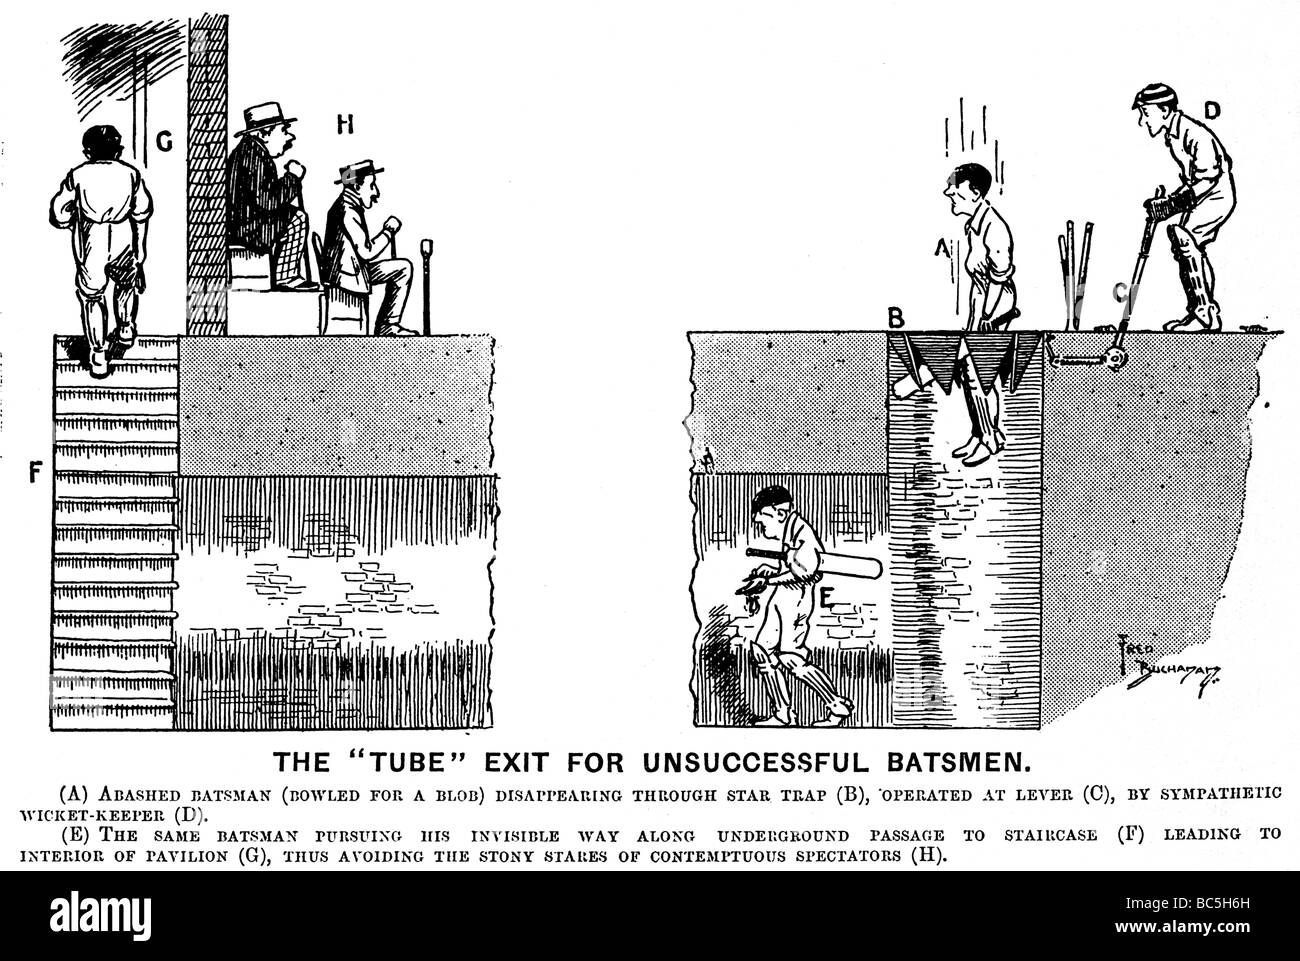 Tube Exit For Unsuccessful Batsmen Edwardian cartoon suggesting how to avoid the stony stares of contemptuous spectators Stock Photo